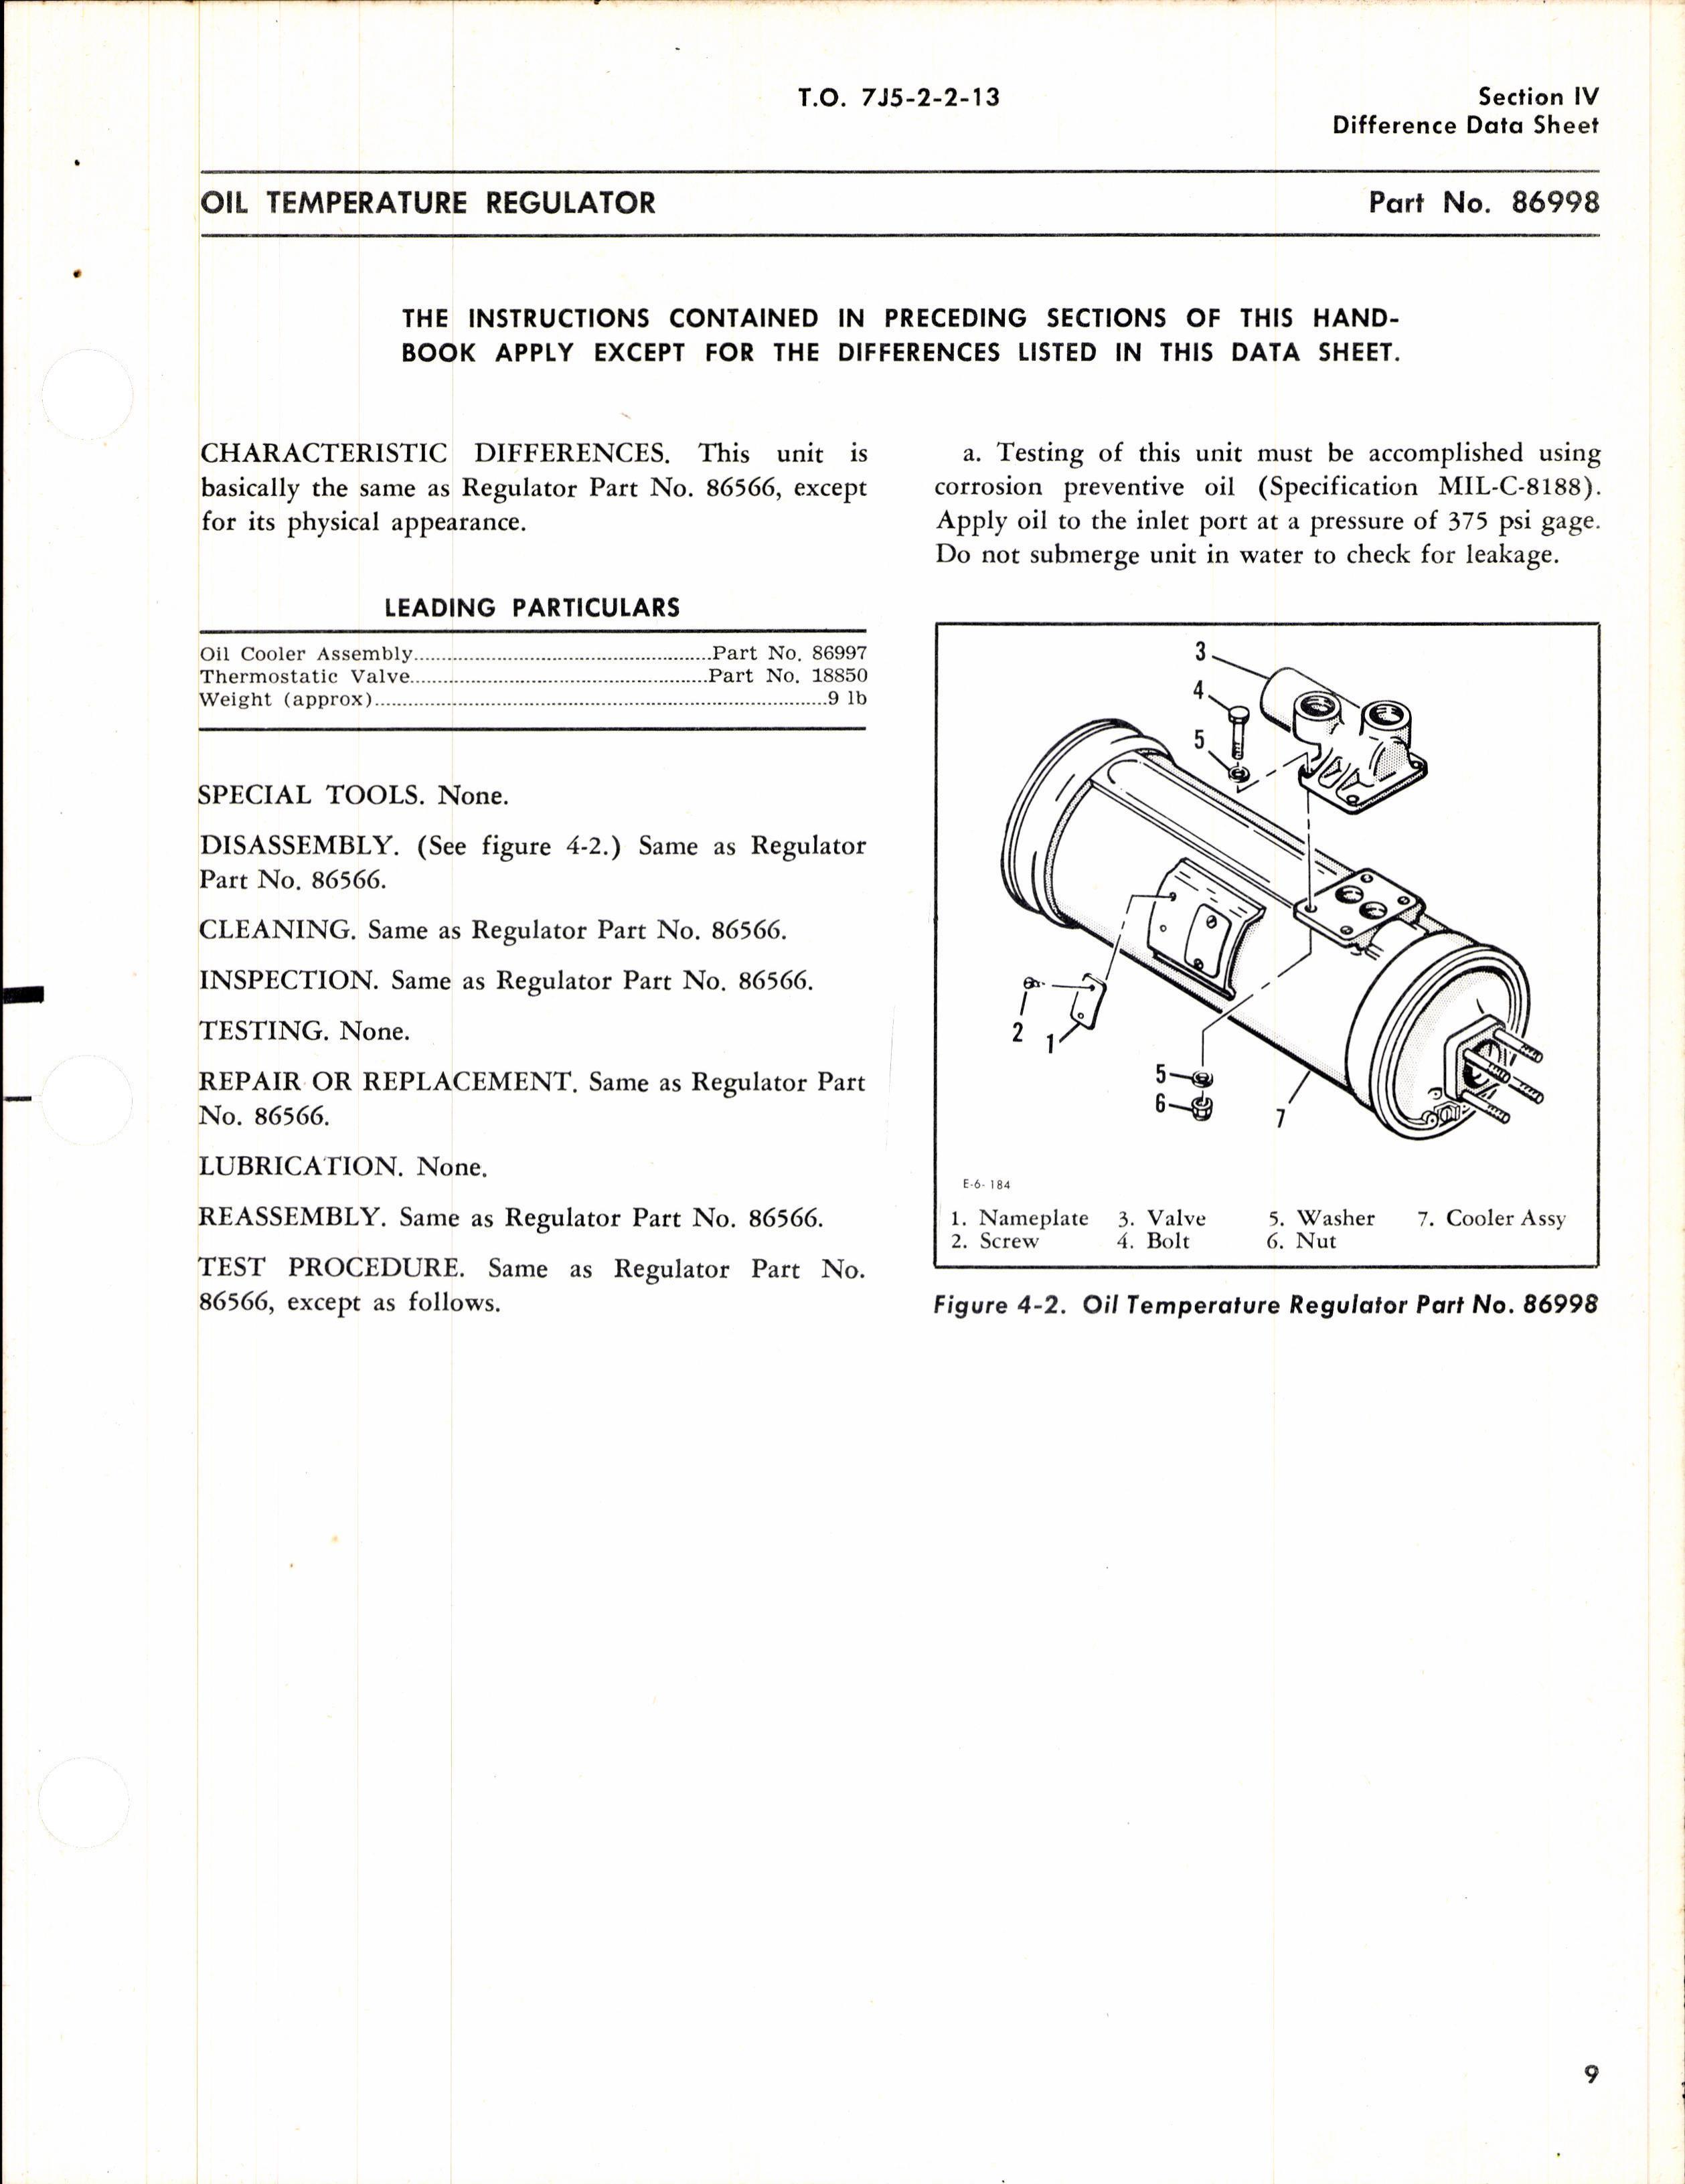 Sample page 11 from AirCorps Library document: Overhaul Instructions for Airesearch Oil Temperature Regulators & Heat Exchanger